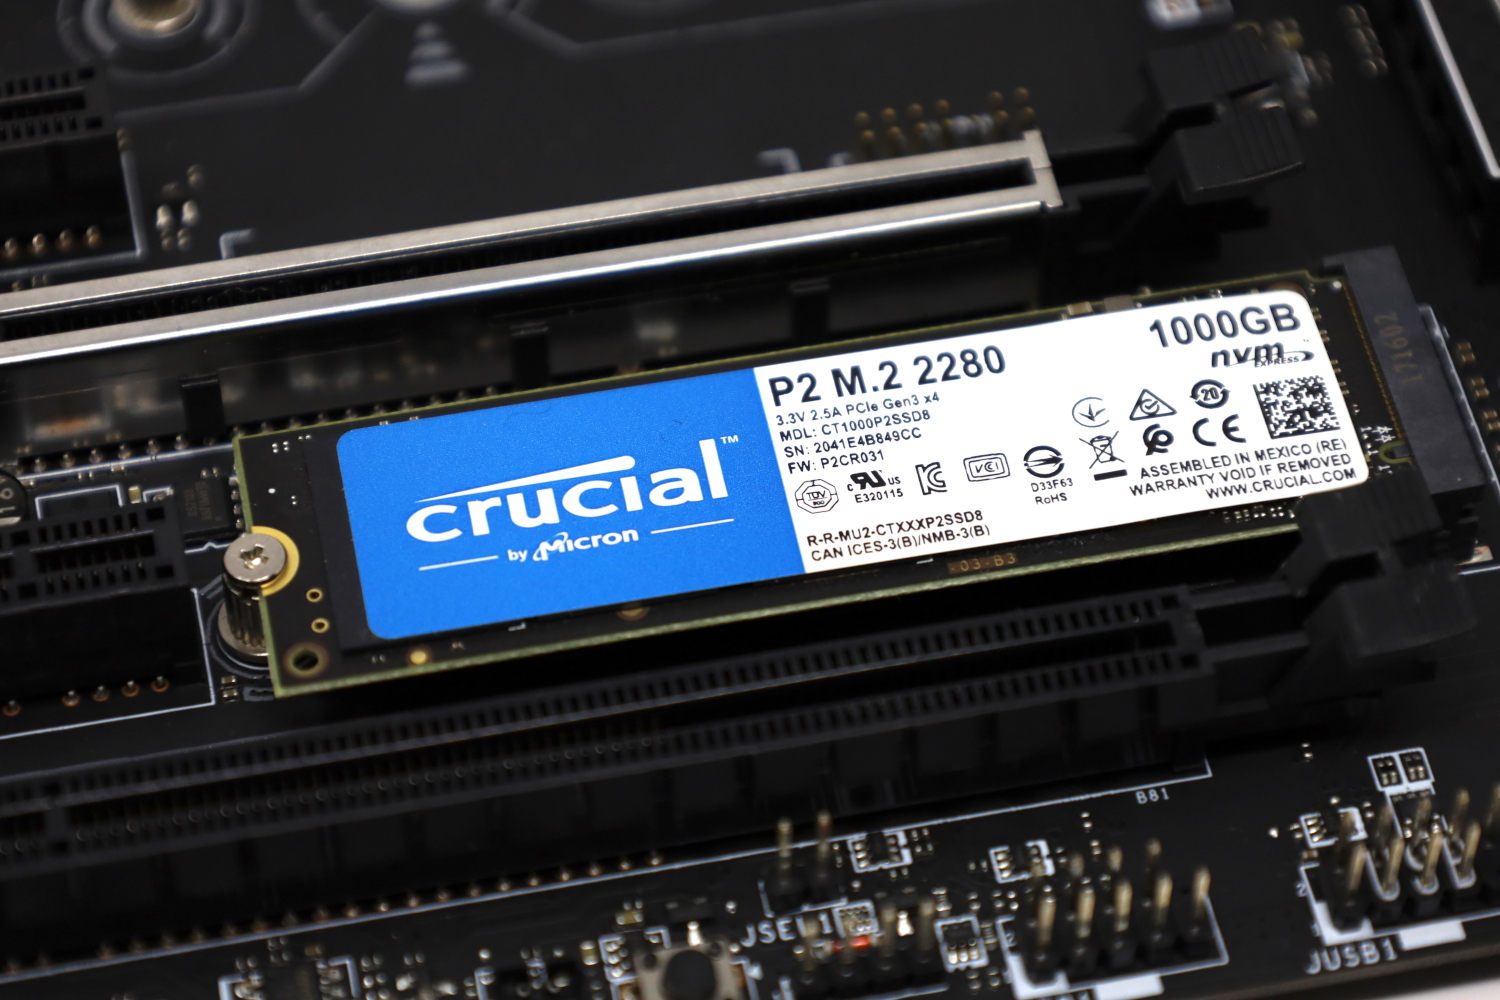 crucial ssd testing software